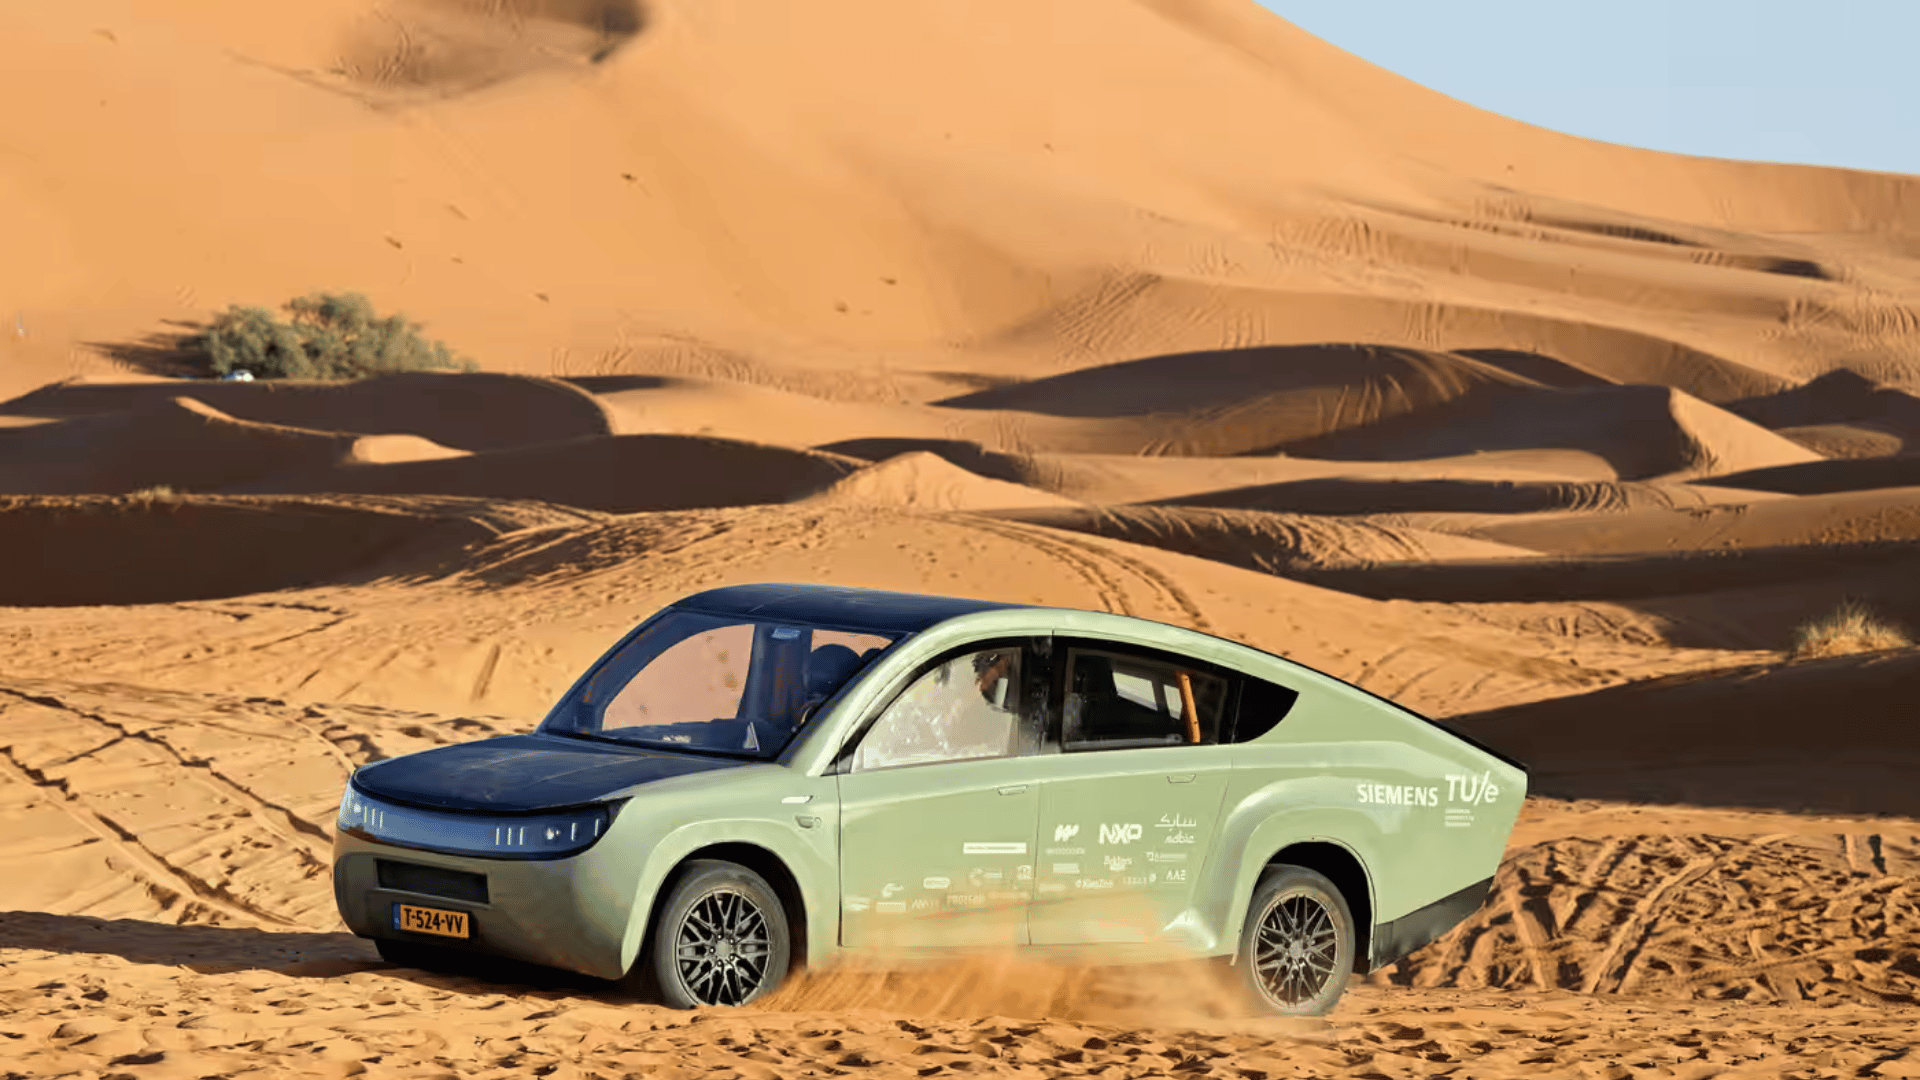 World’s first off-road solar-powered SUV